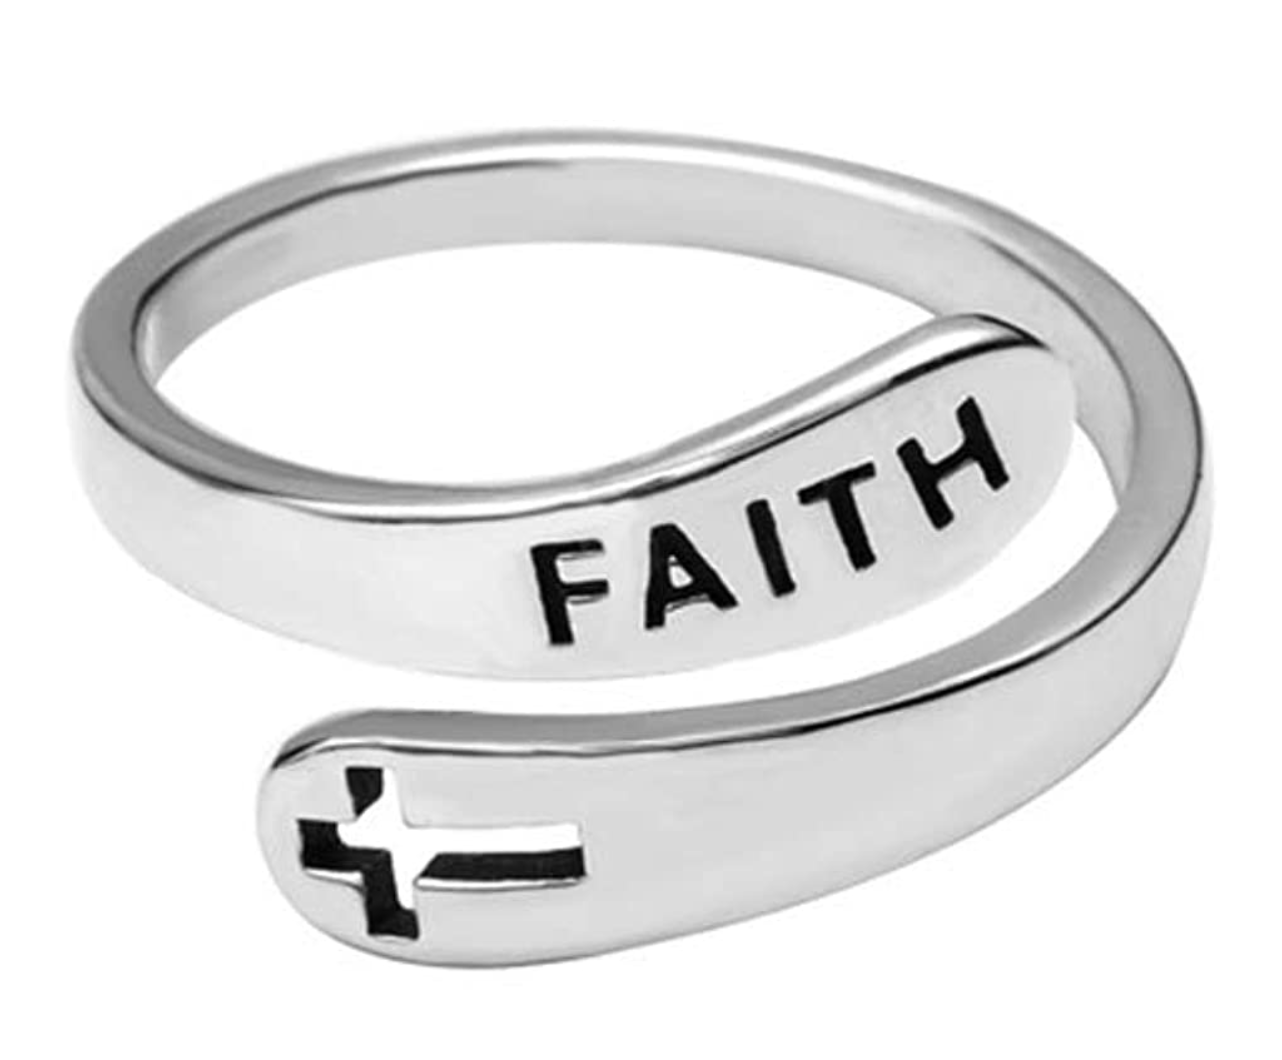 STERLING SILVER FAITH RING